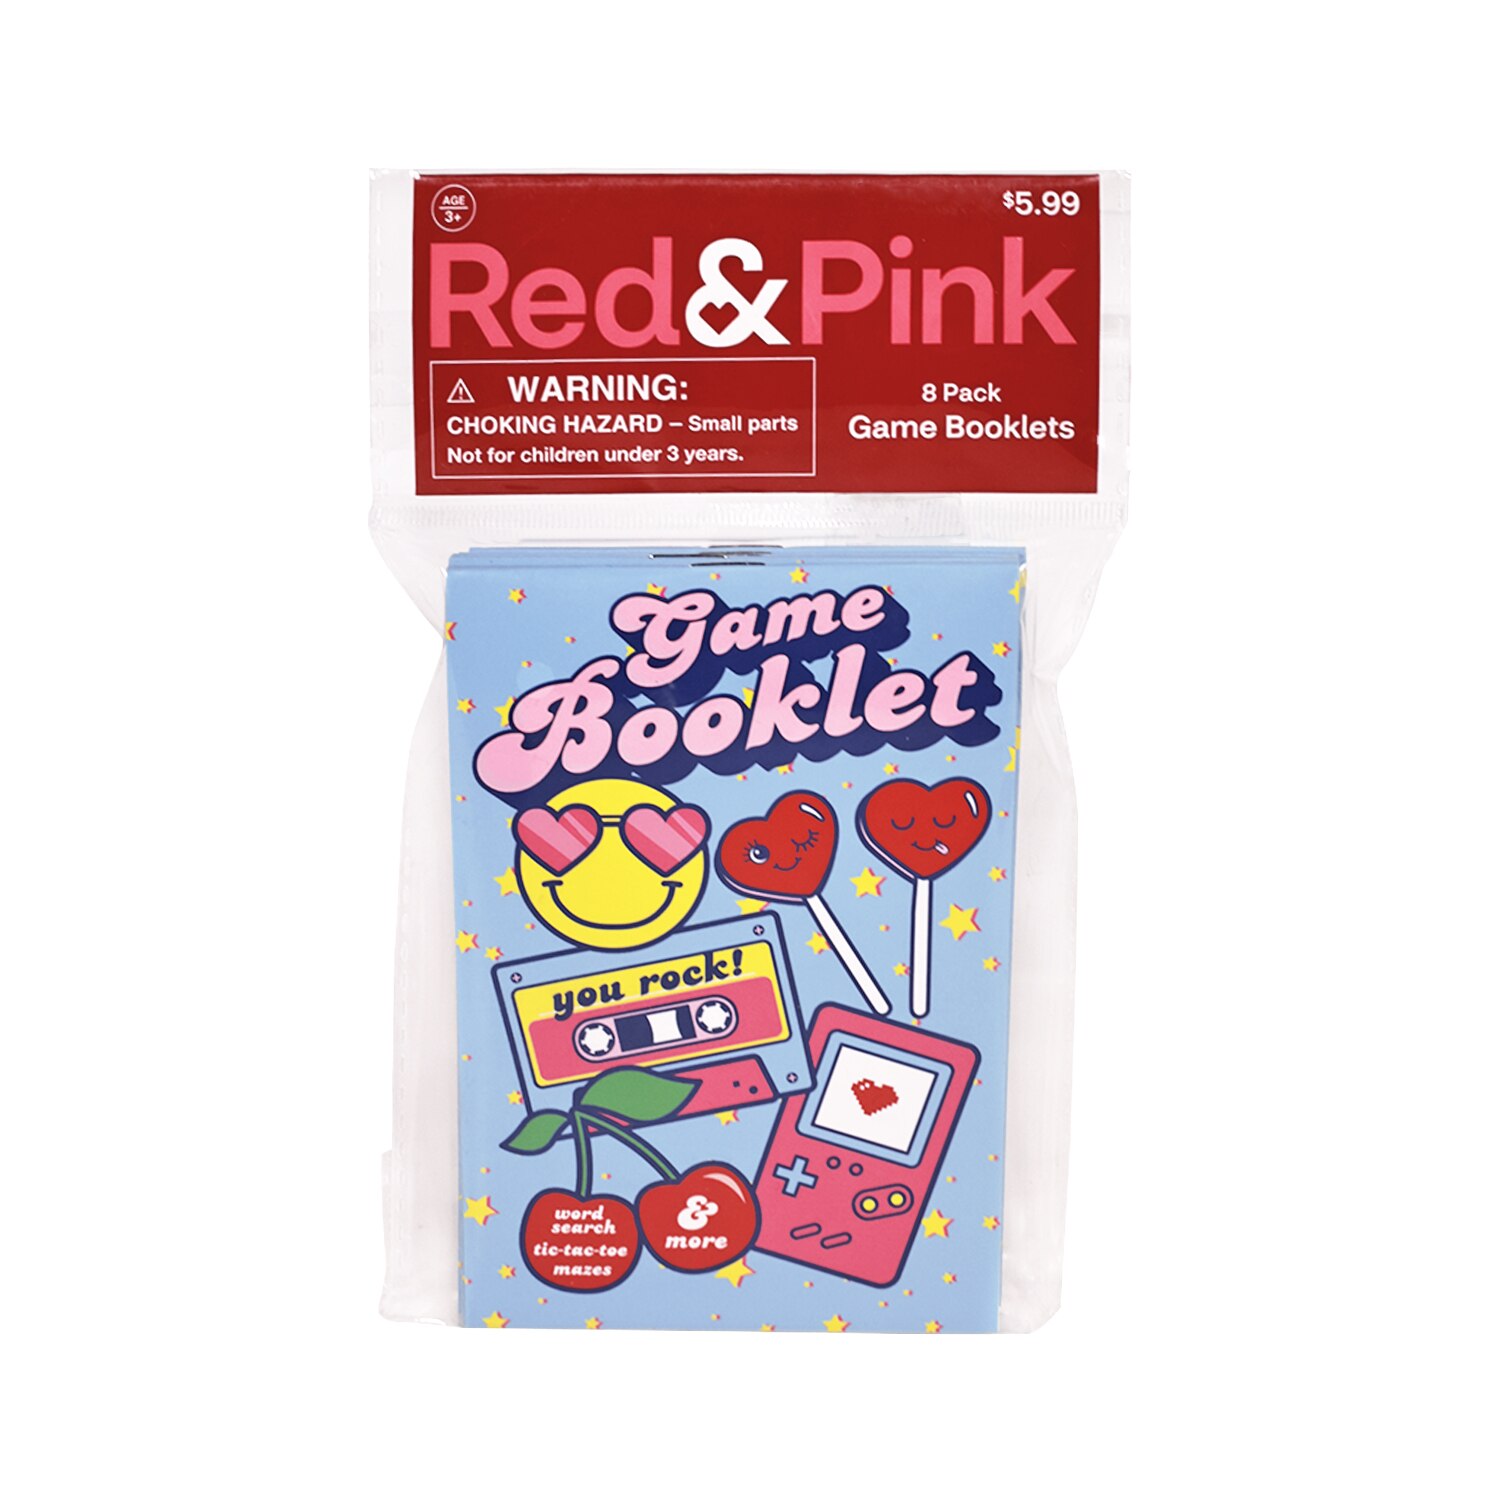 Red & Pink Game Booklets, 8pk - 8 Ct , CVS